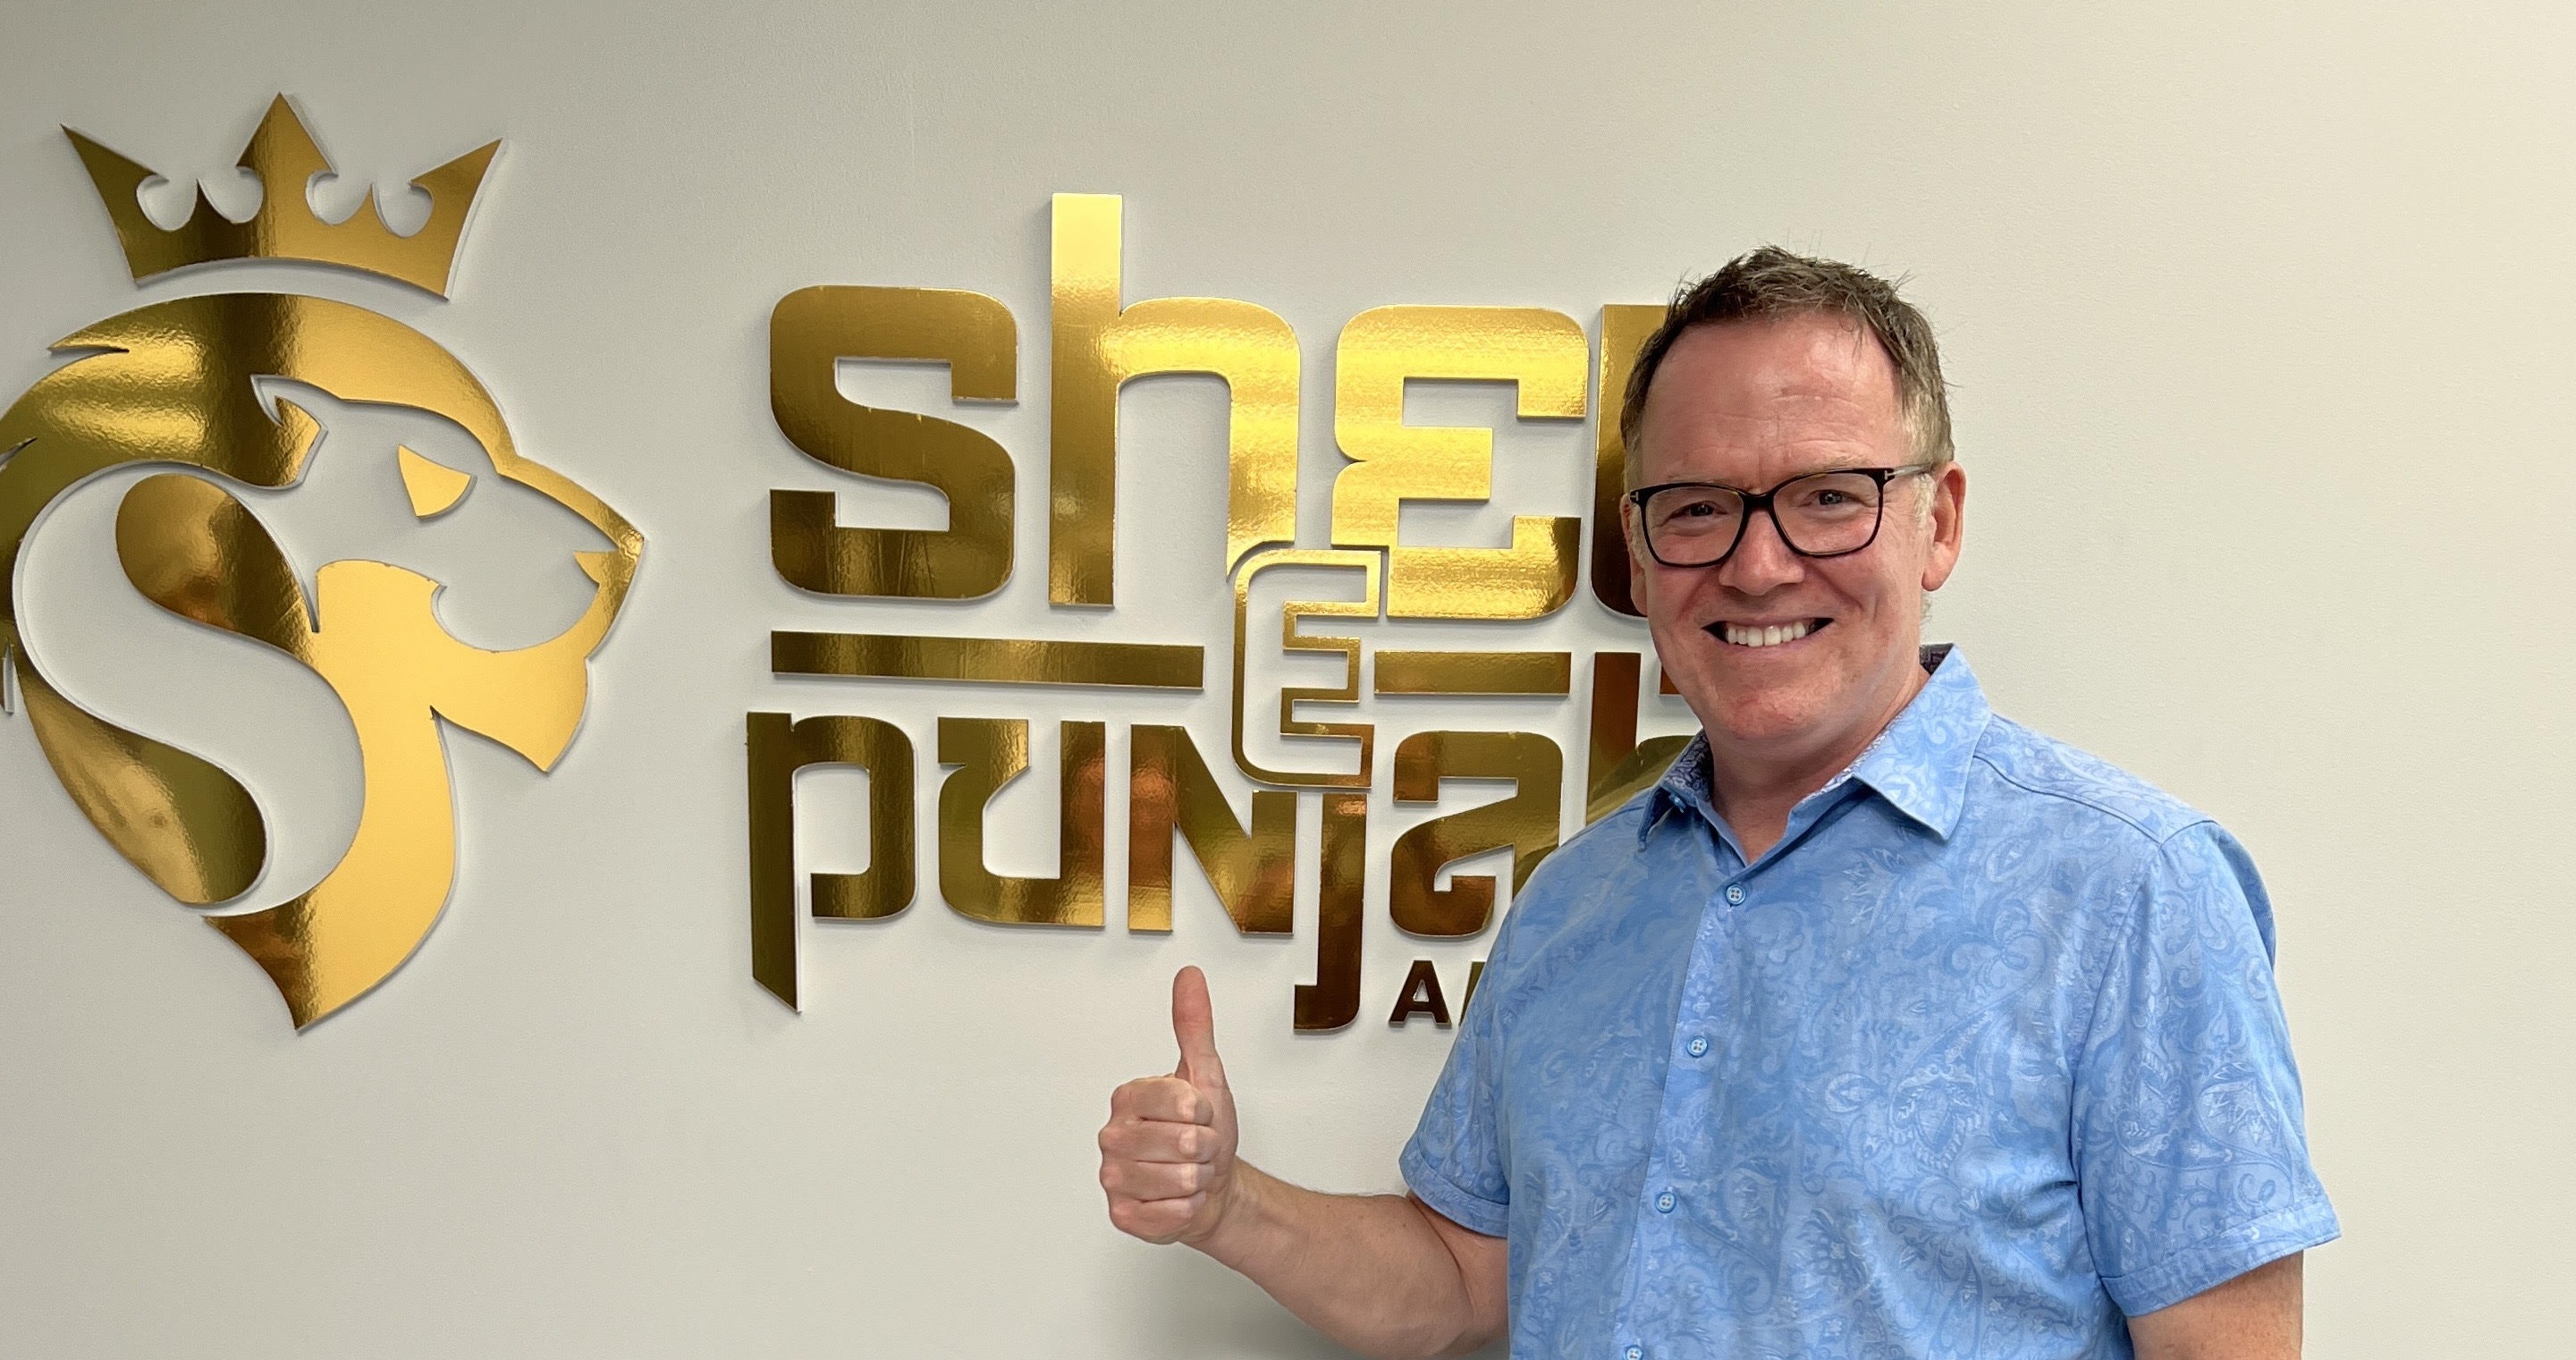 During a visit to Sher-E-Punjab Radio’s studio, Kevin Falcon promises second tower at Surrey hospital